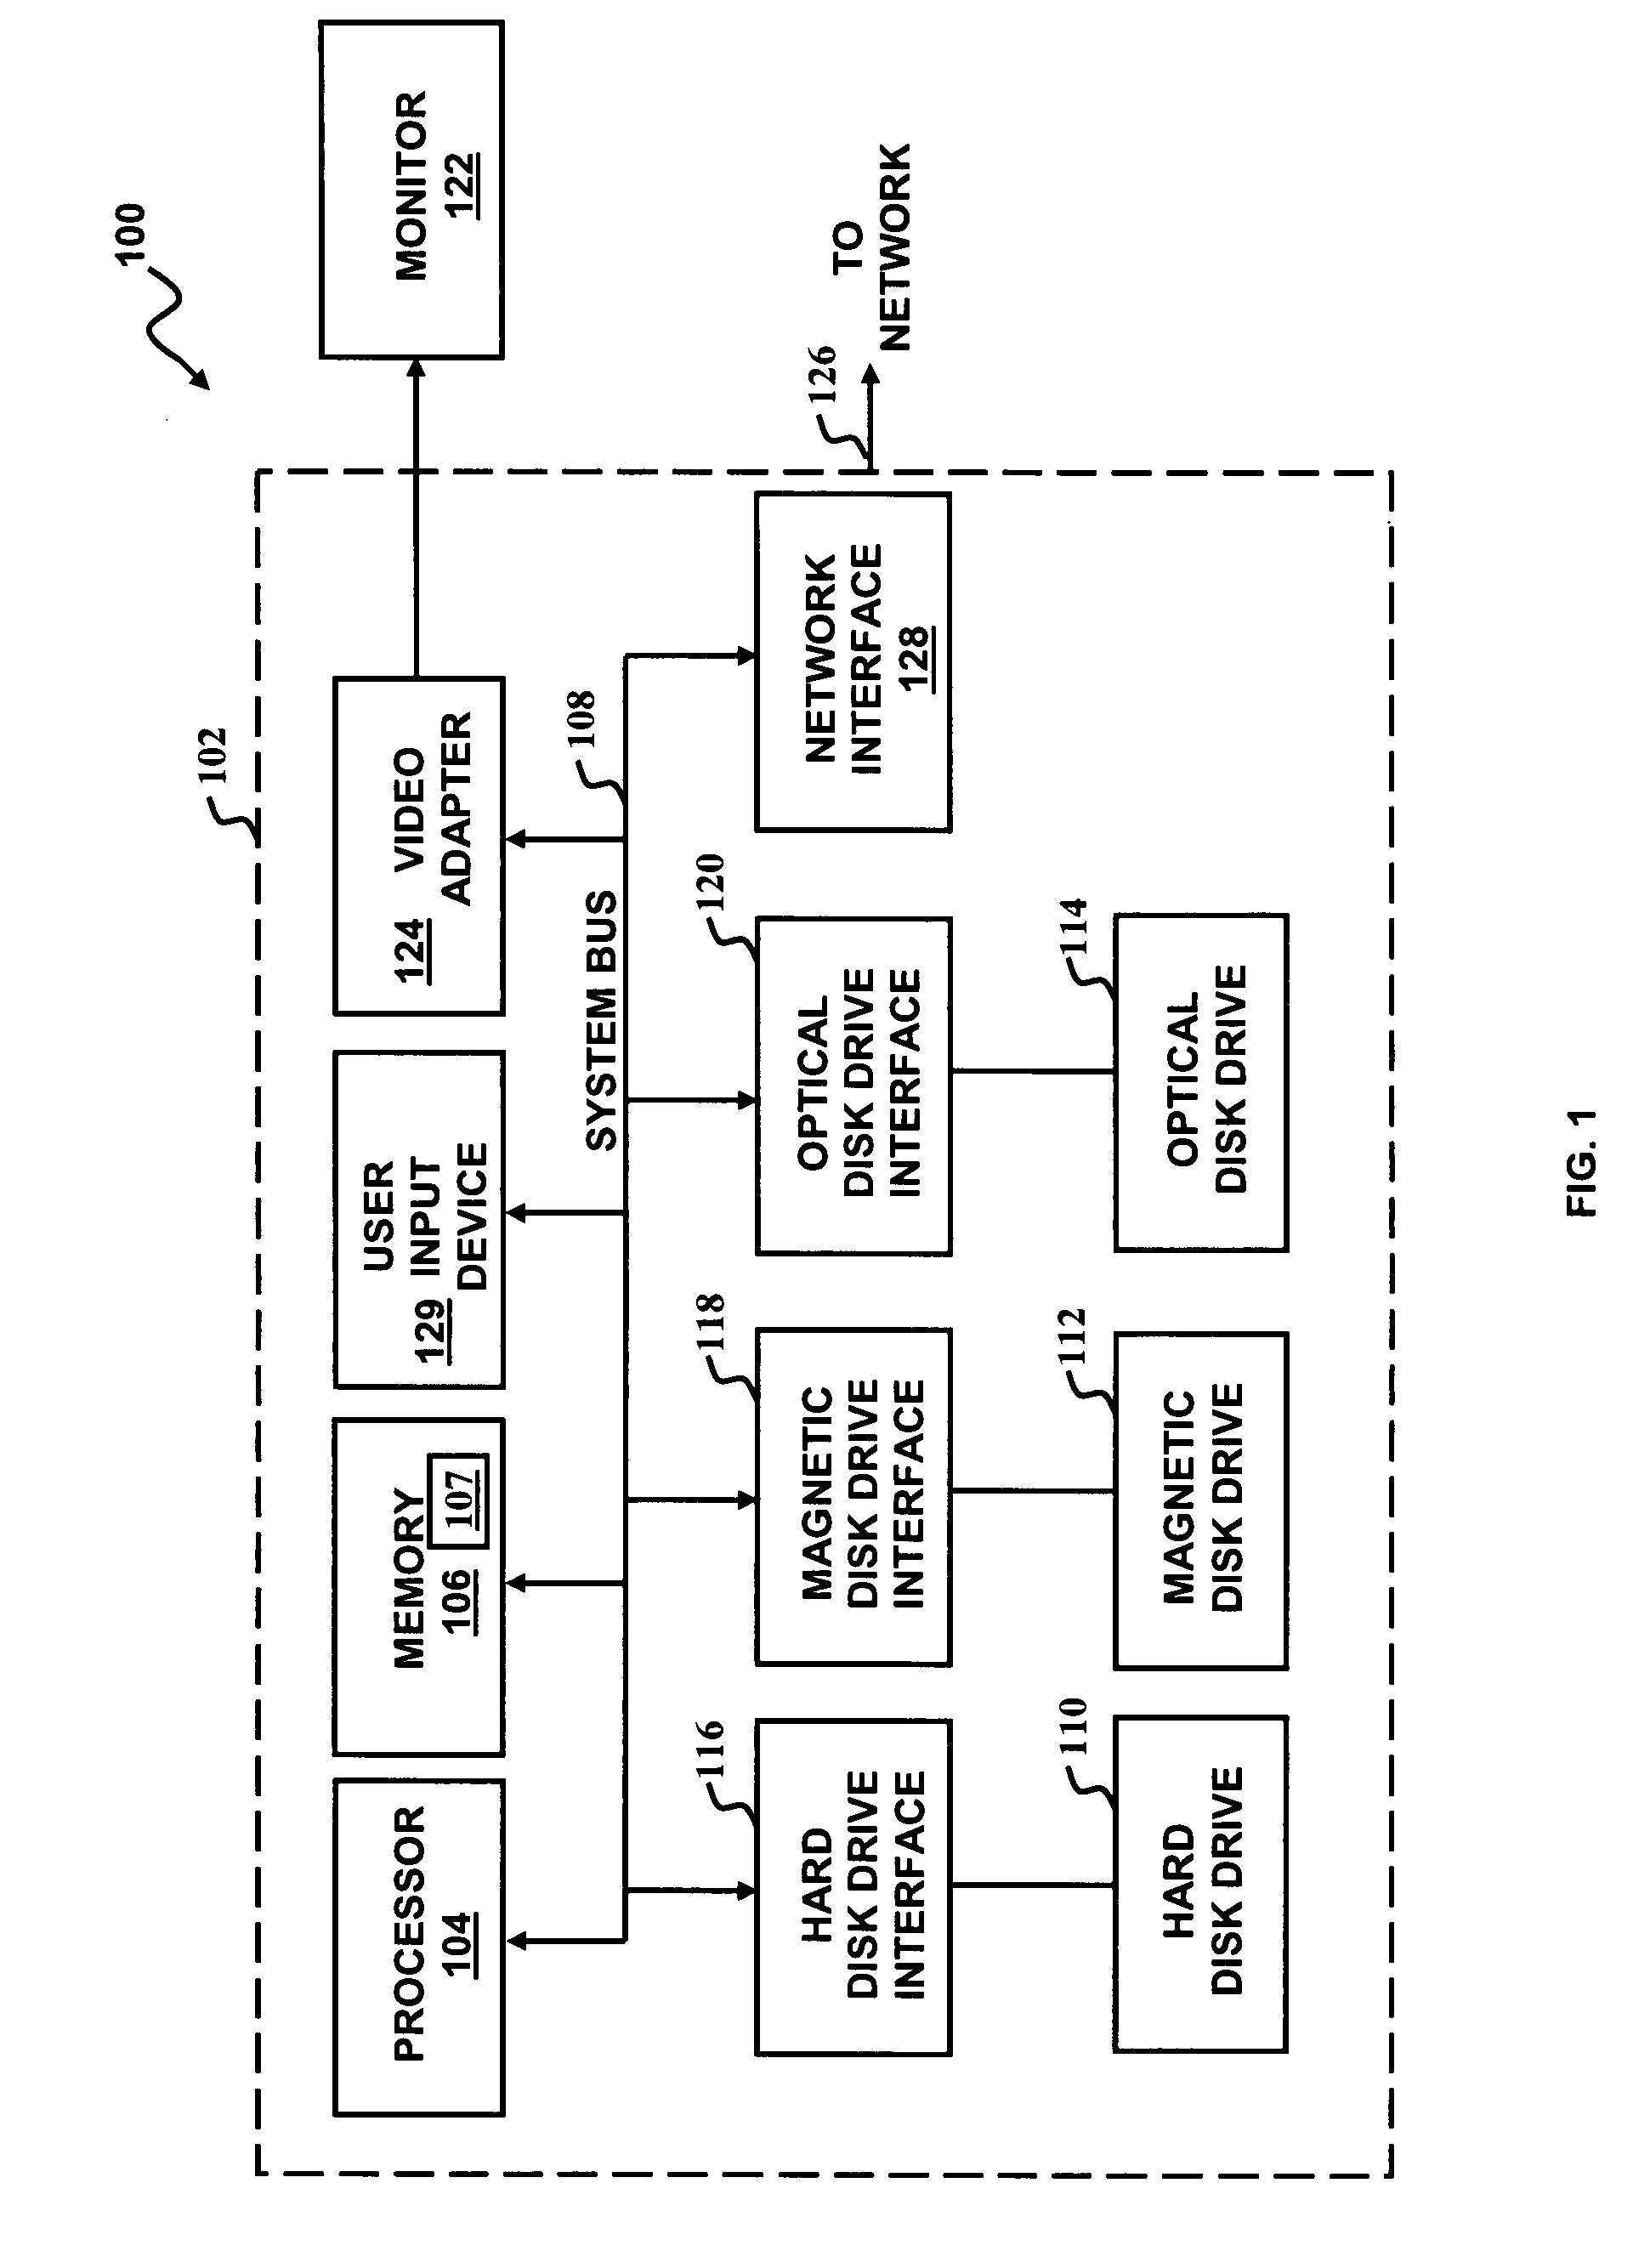 Method and system for the simultaneous measurement of a plurality of properties associated with an exhaust gas mixture